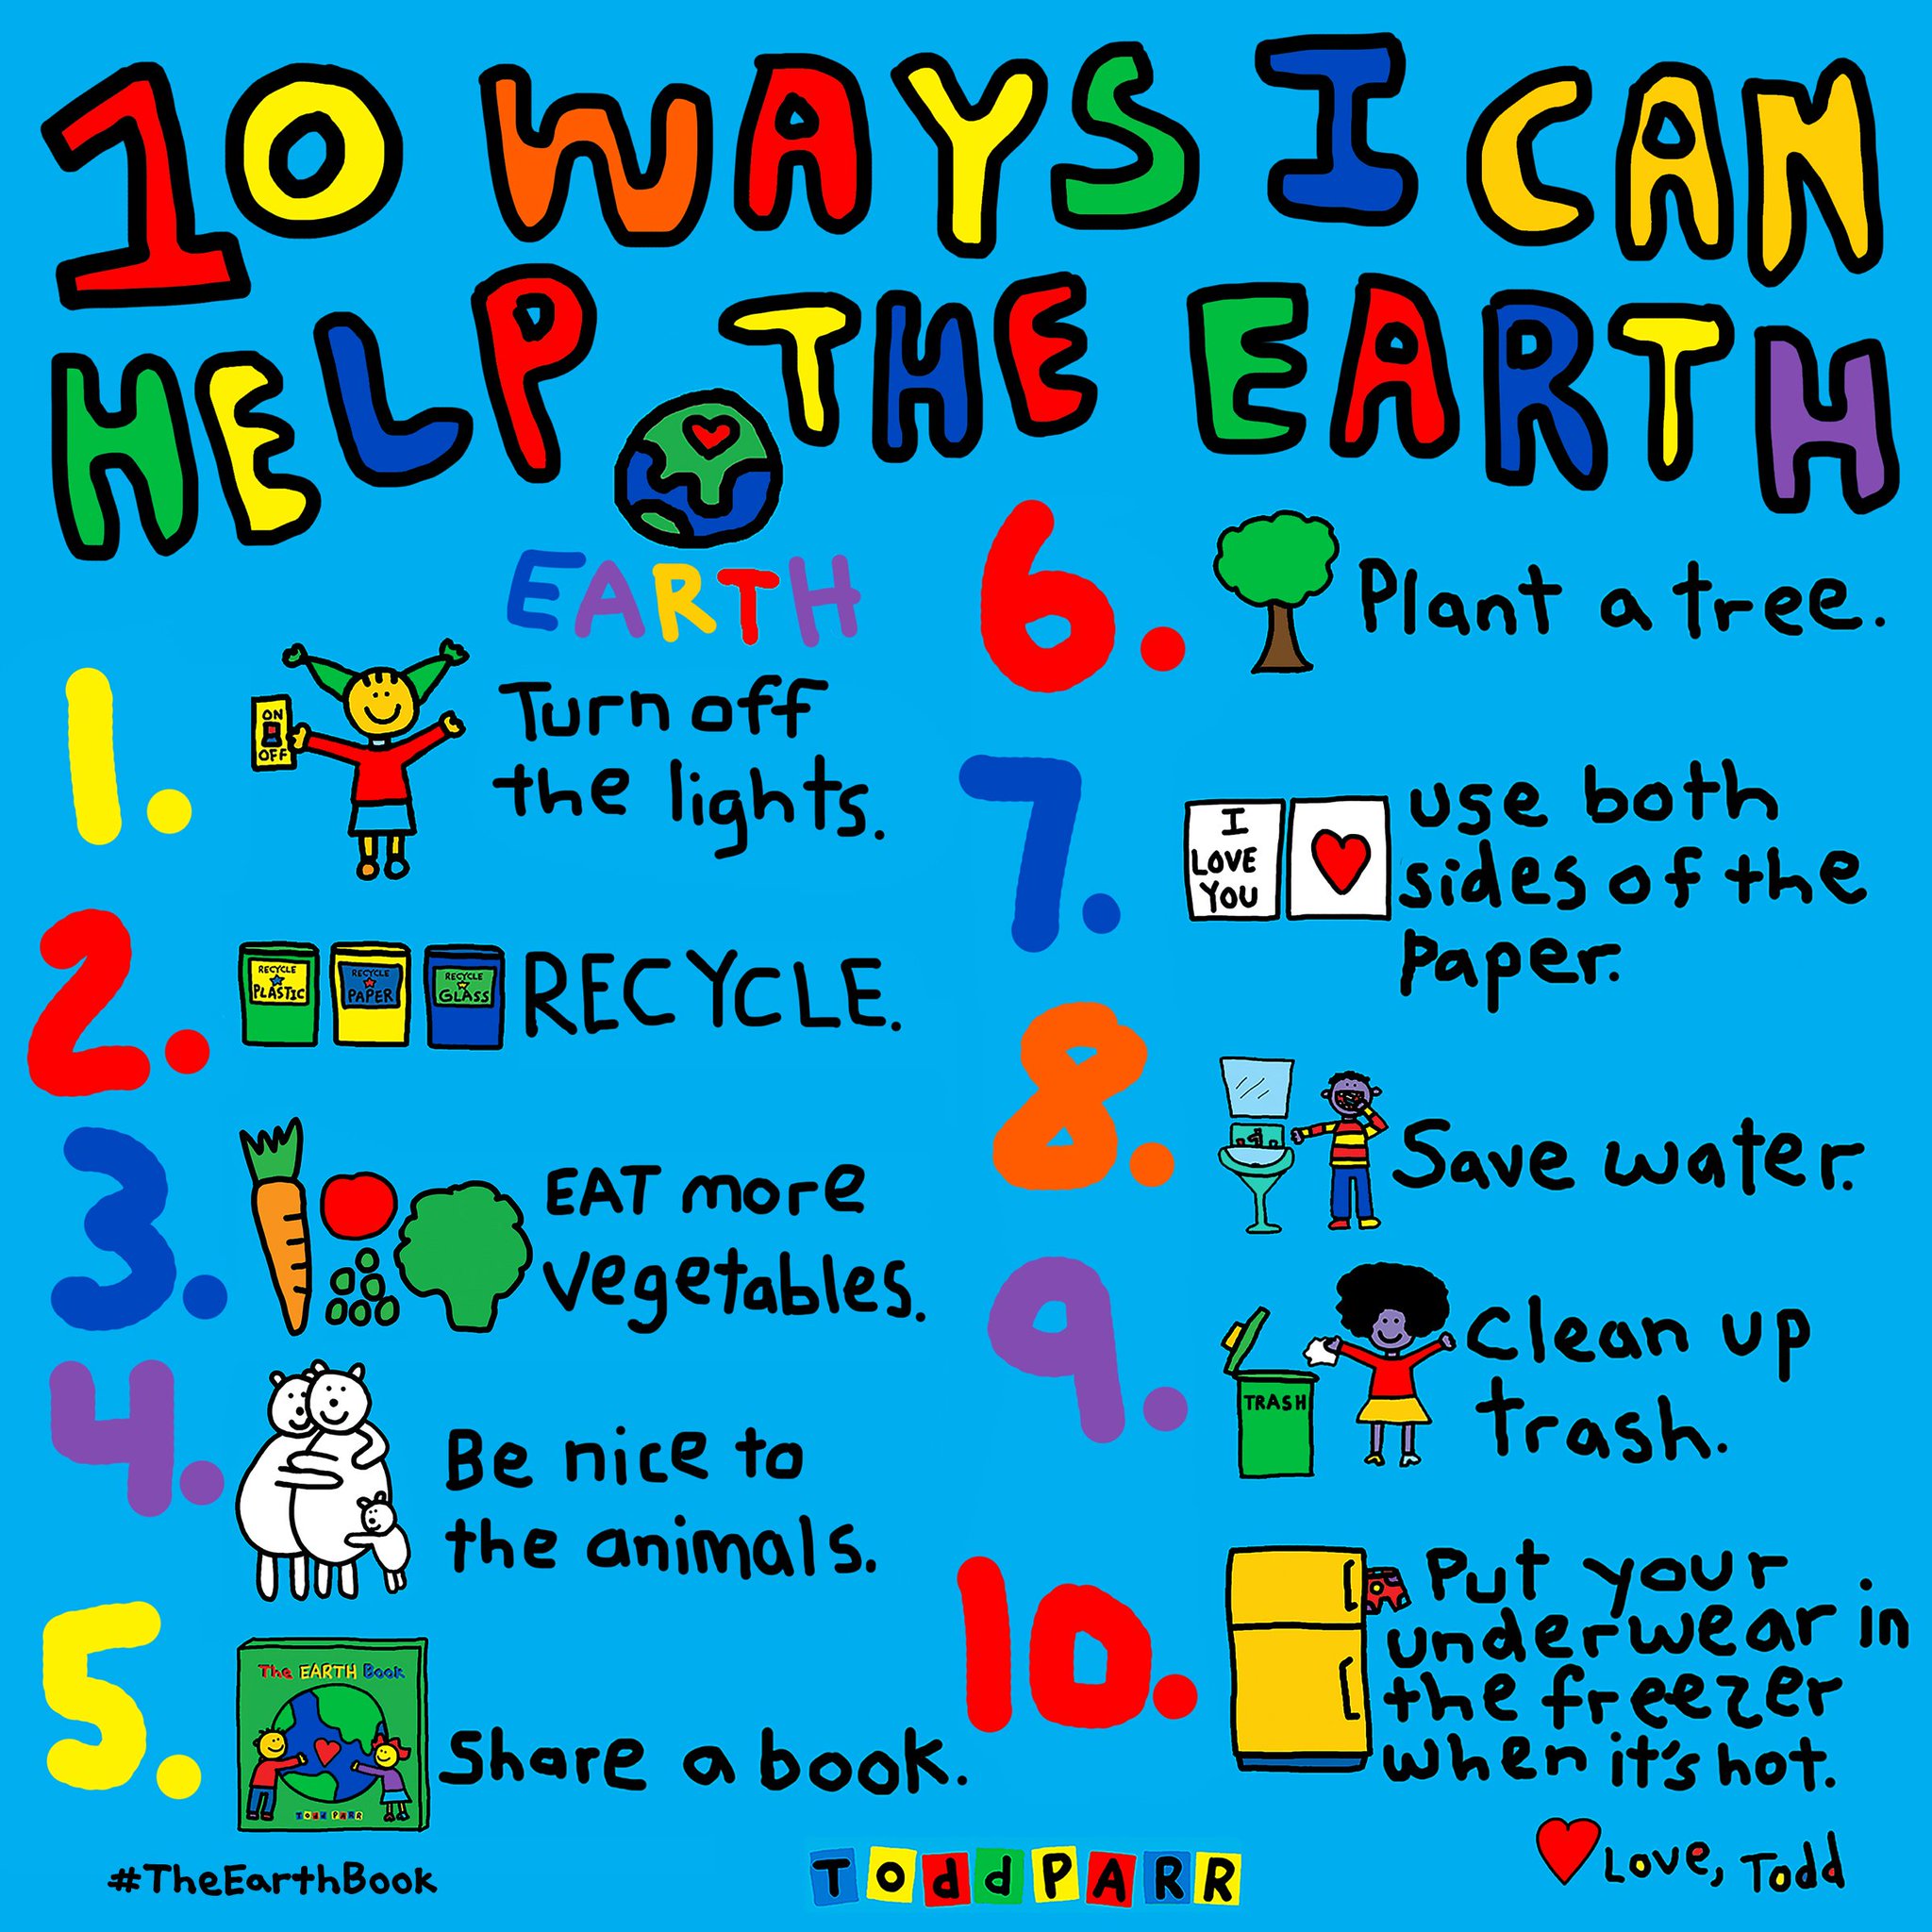 Todd Parr on Twitter: "Happy #EarthDay ! 🌏 Here are some ...